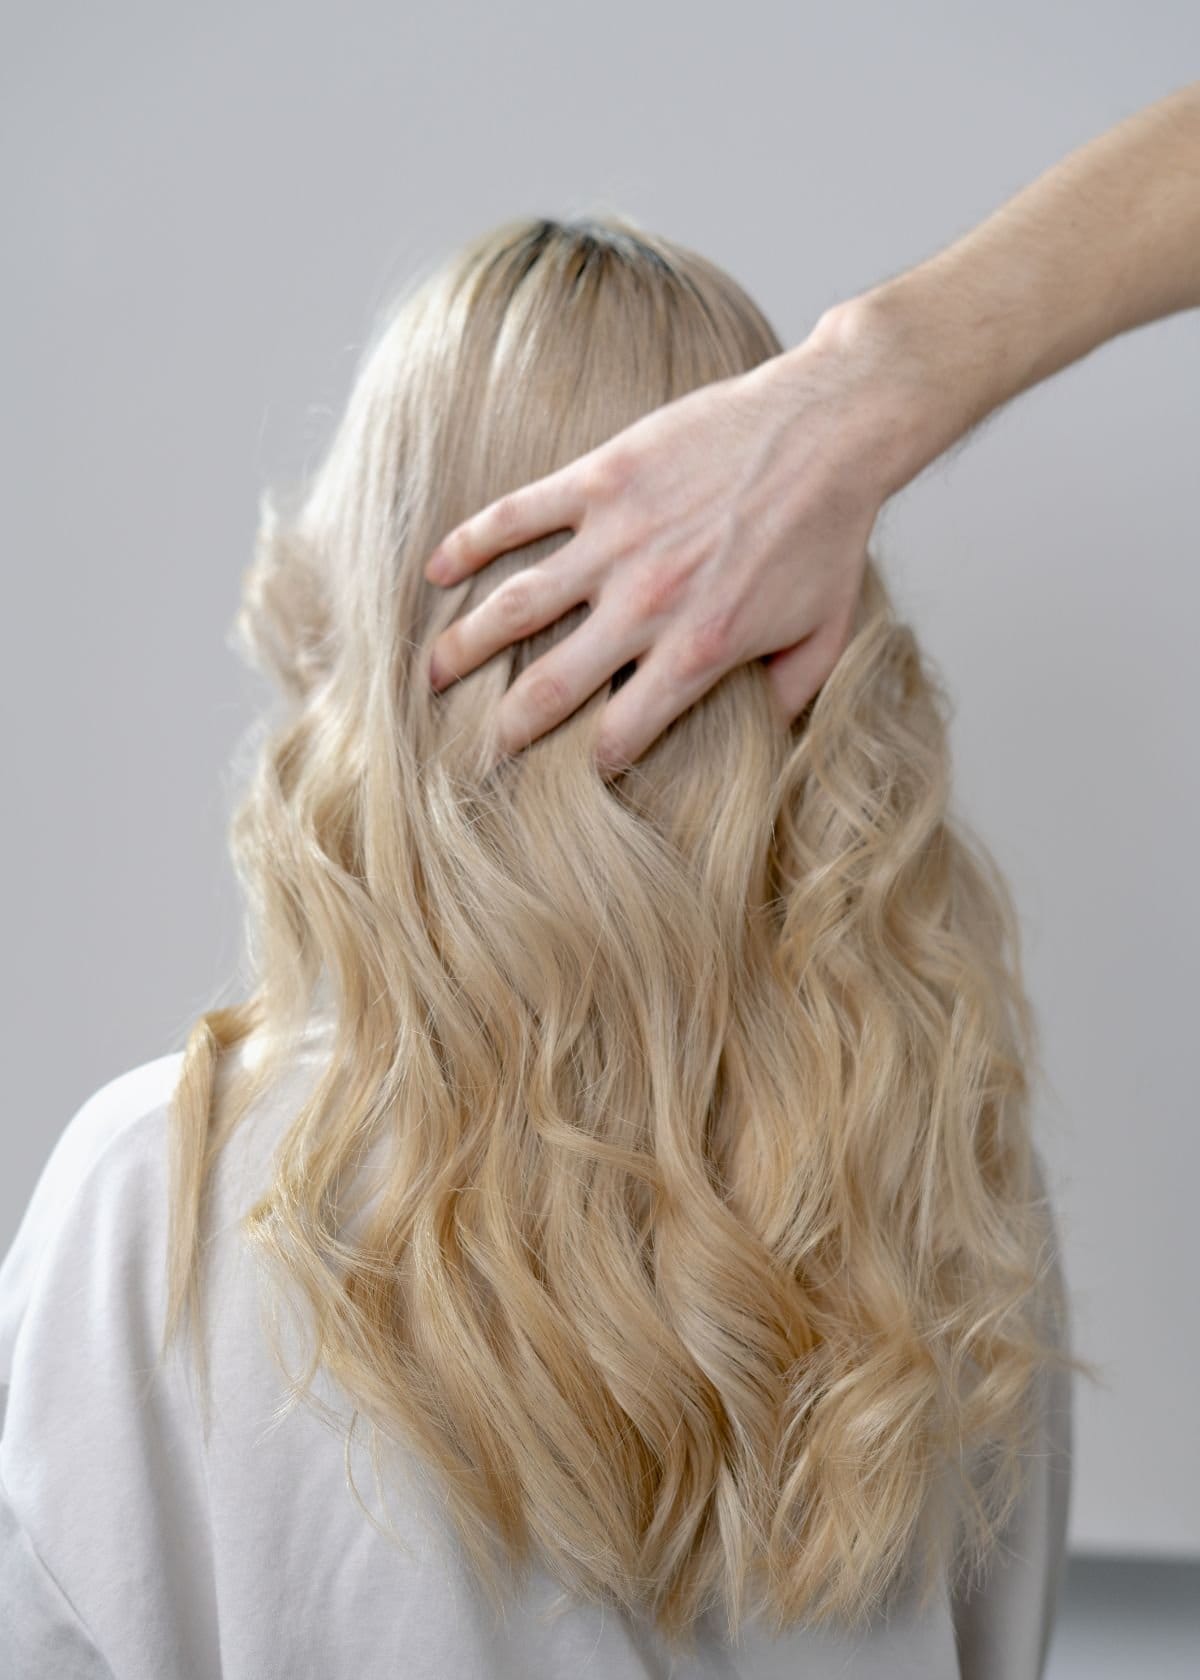 Will Toner Fix Uneven Bleached Hair? Learn From Expert